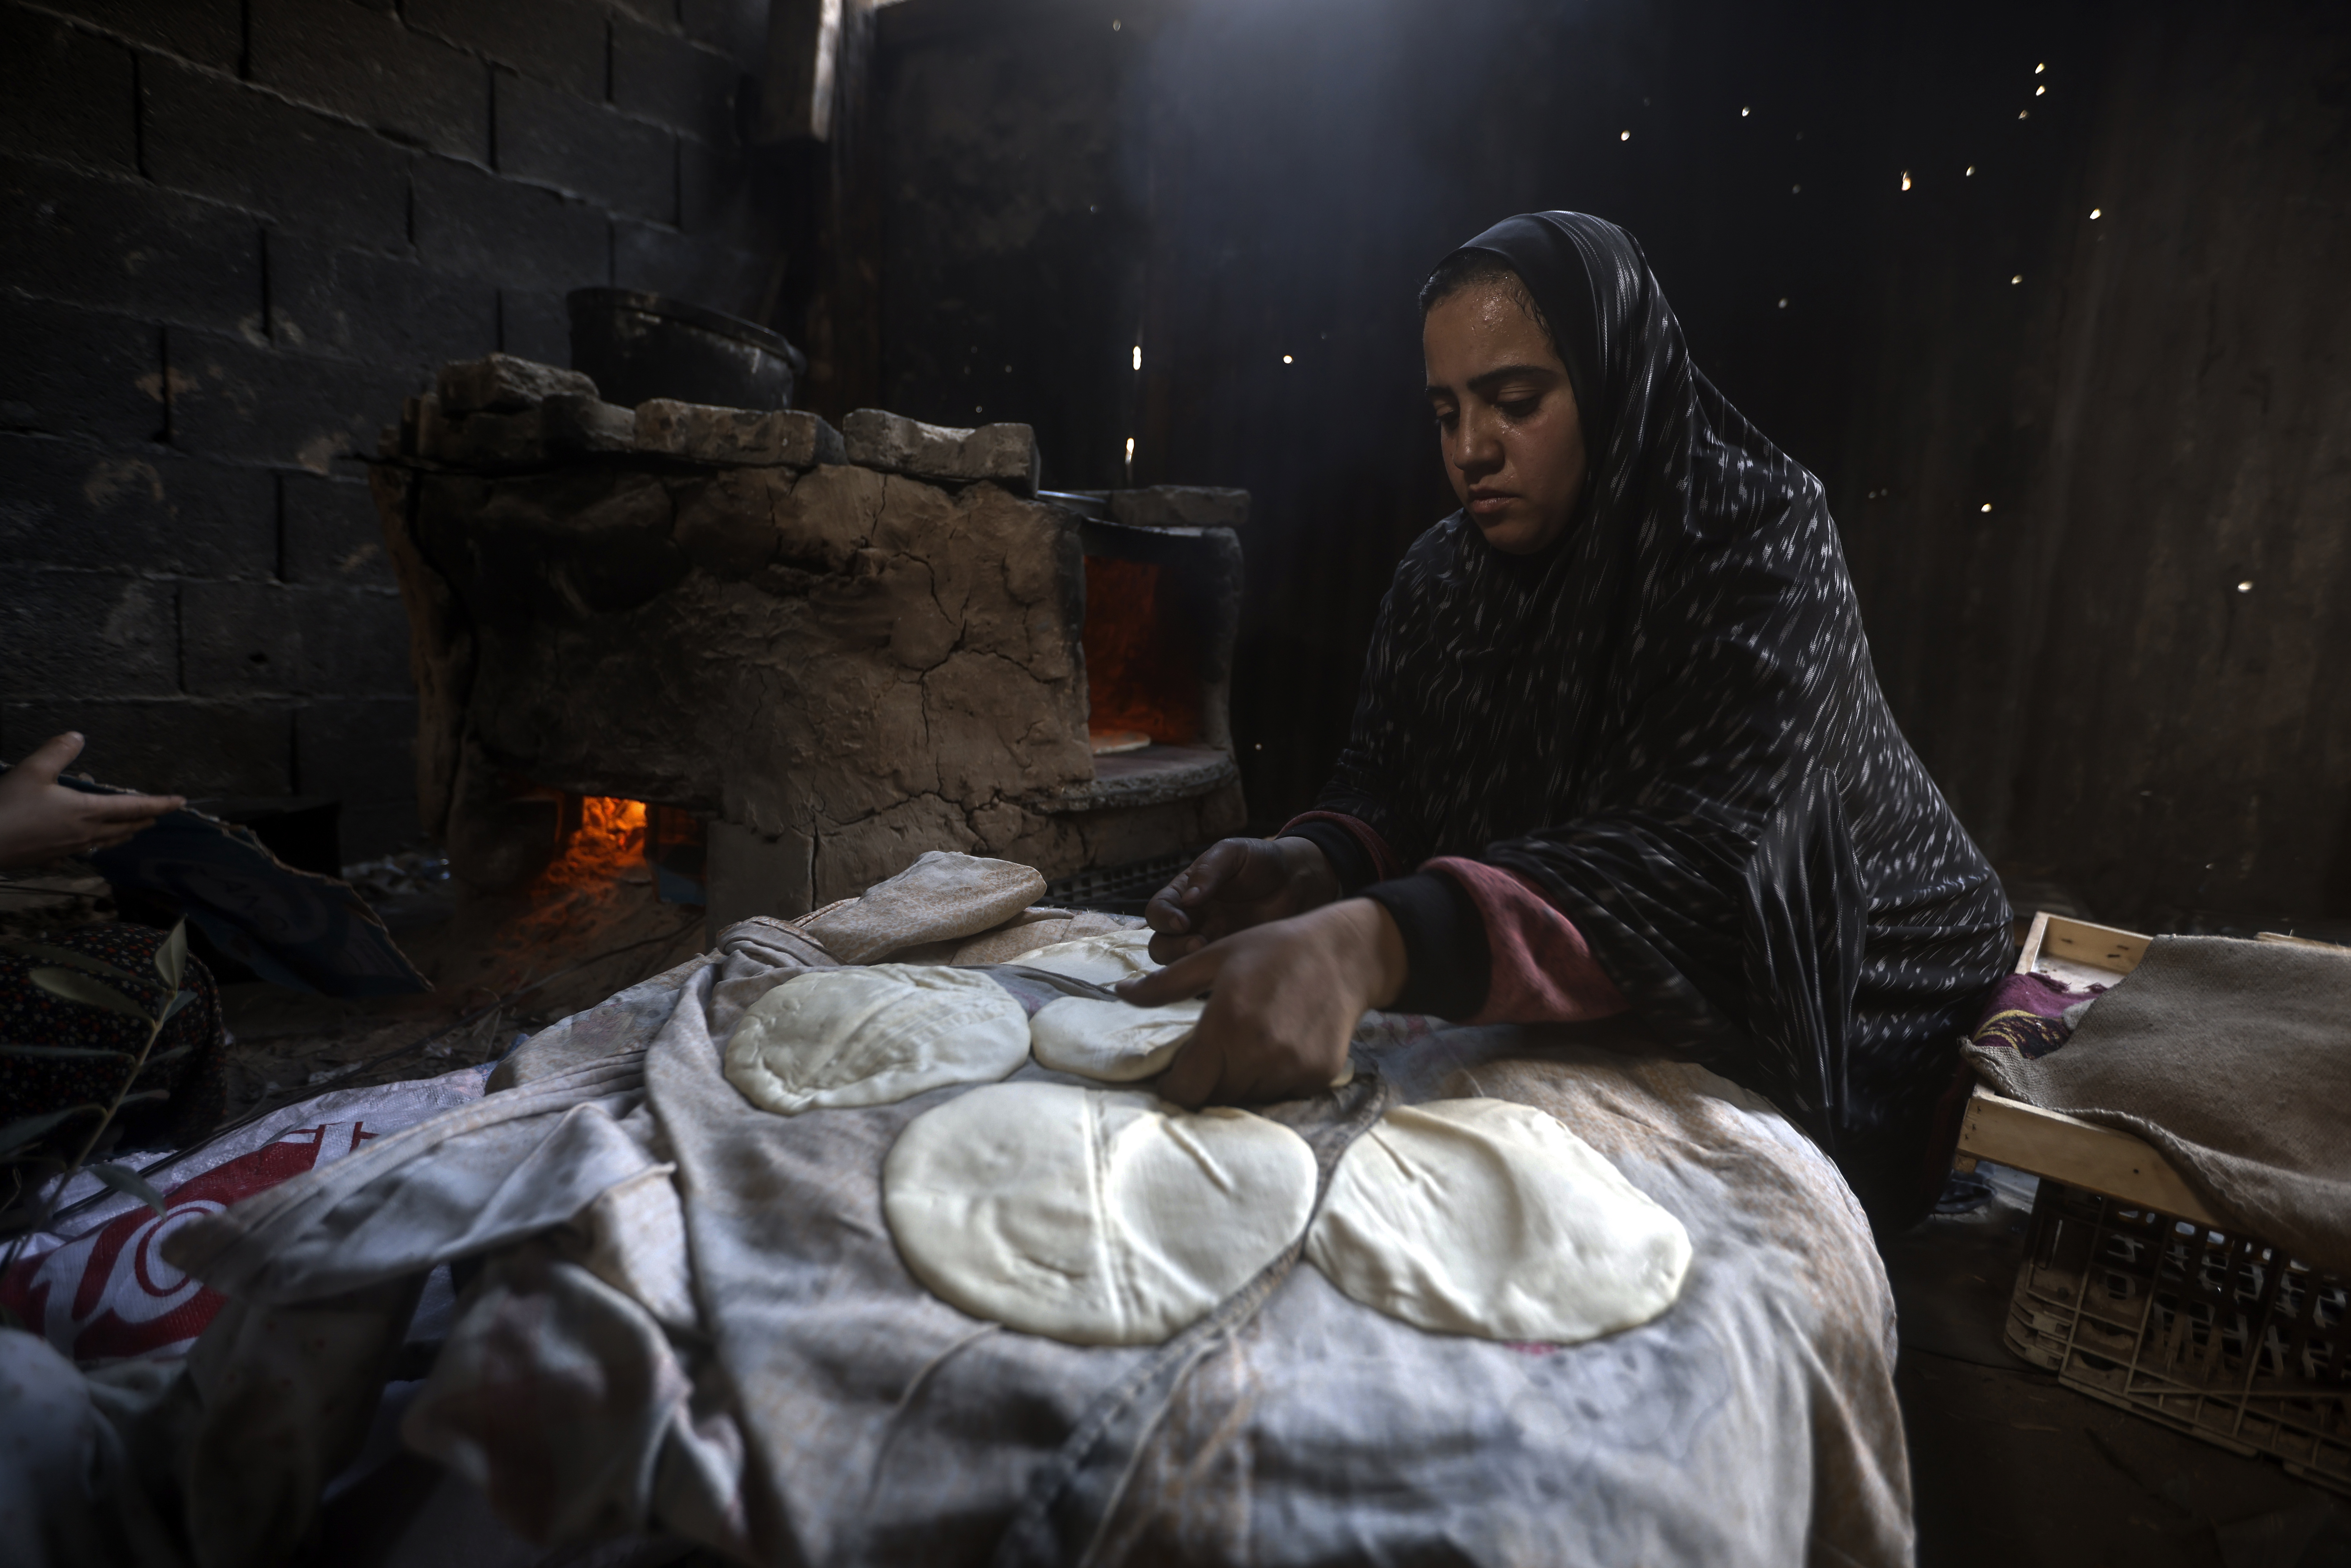 A Palestinian woman displaced by the Israeli ground offensive on the Gaza Strip bake bread at a makeshift tent camp in Rafah, Gaza Strip, Monday